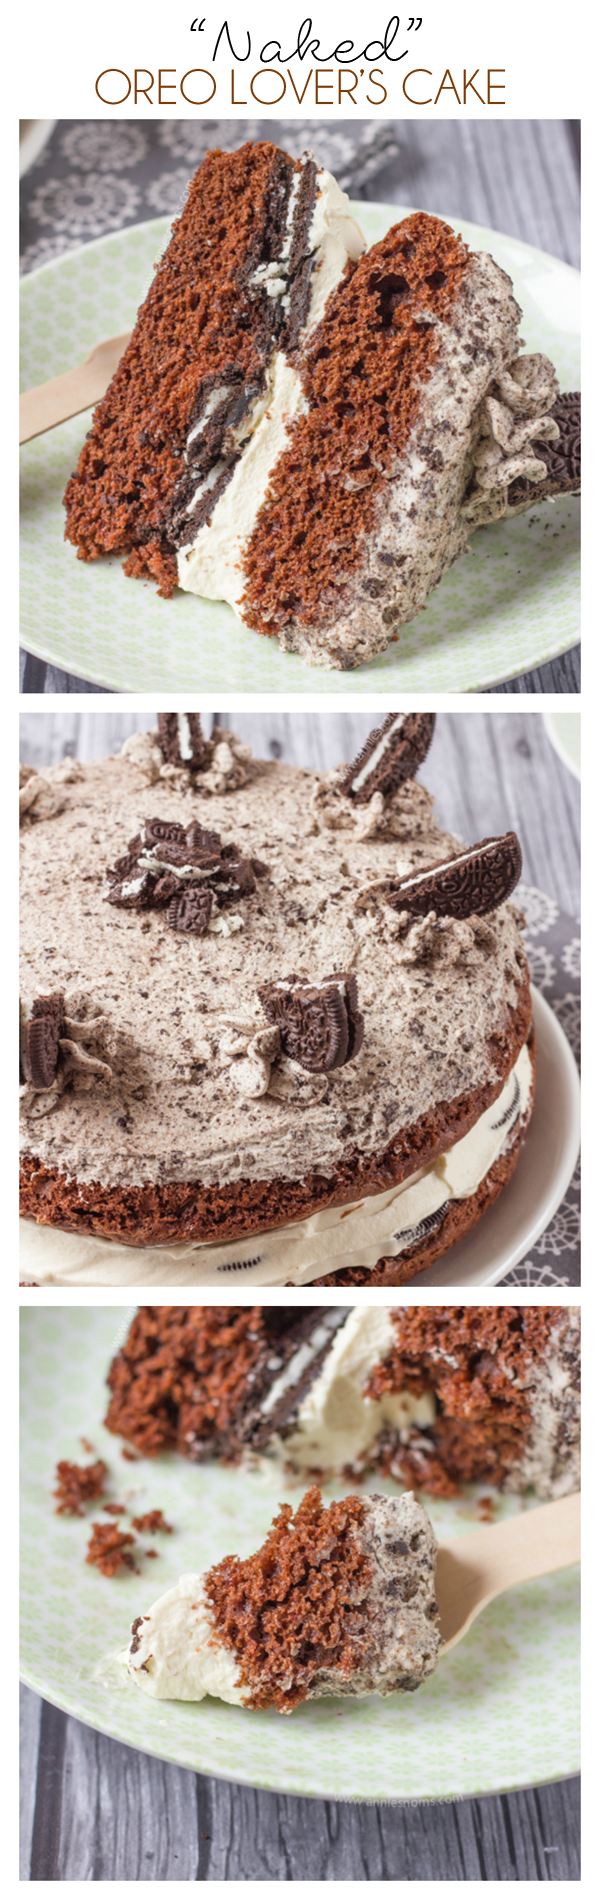 My "Naked" Oreo Lover's Cake is one decadent, delicious dessert! Super simple to make, it looks like it took you hours to perfect those rich, chocolate cakes, crunchy Oreo centre and perfectly smooth whipped cream frosting.